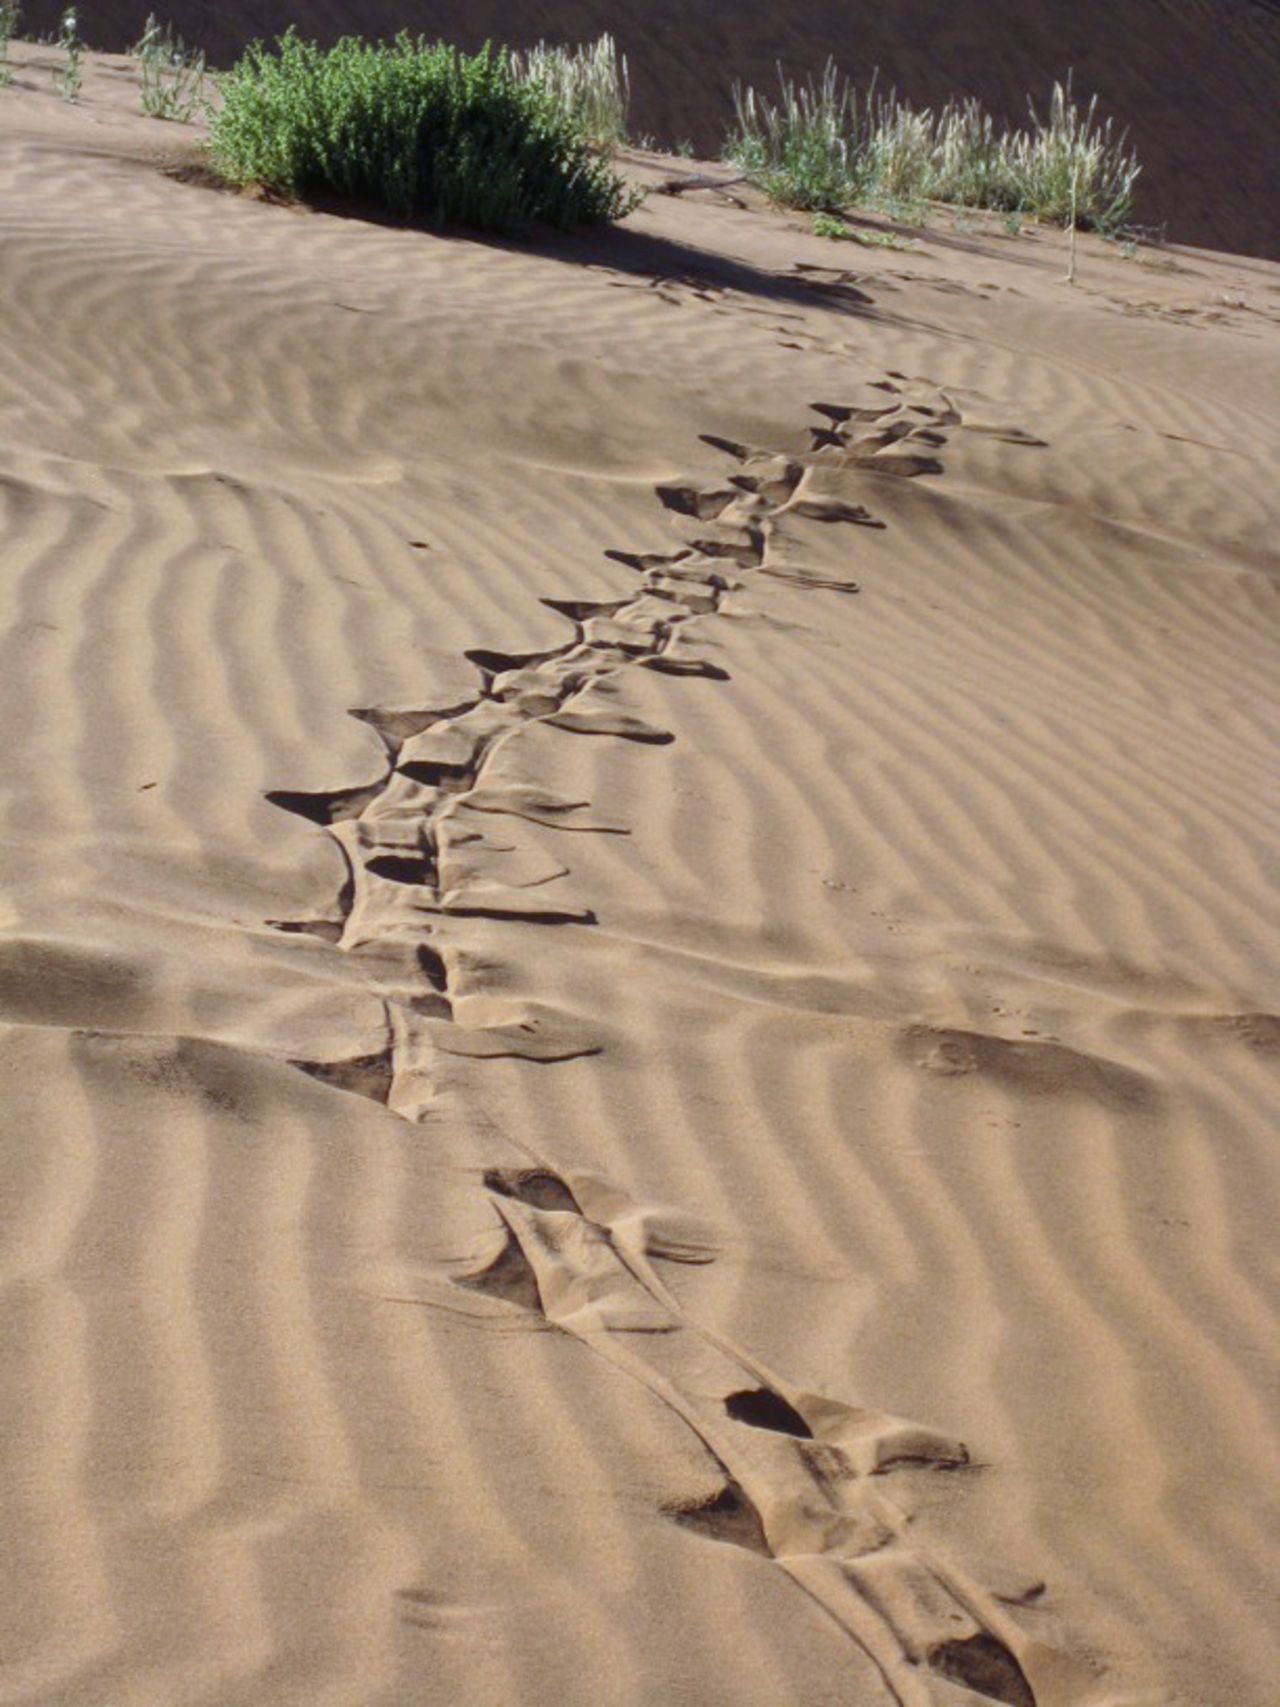 Grasses grow, providing food for springbok, gemsbok and oryx. Here oryx tracks leave deep wells in the soft sand.